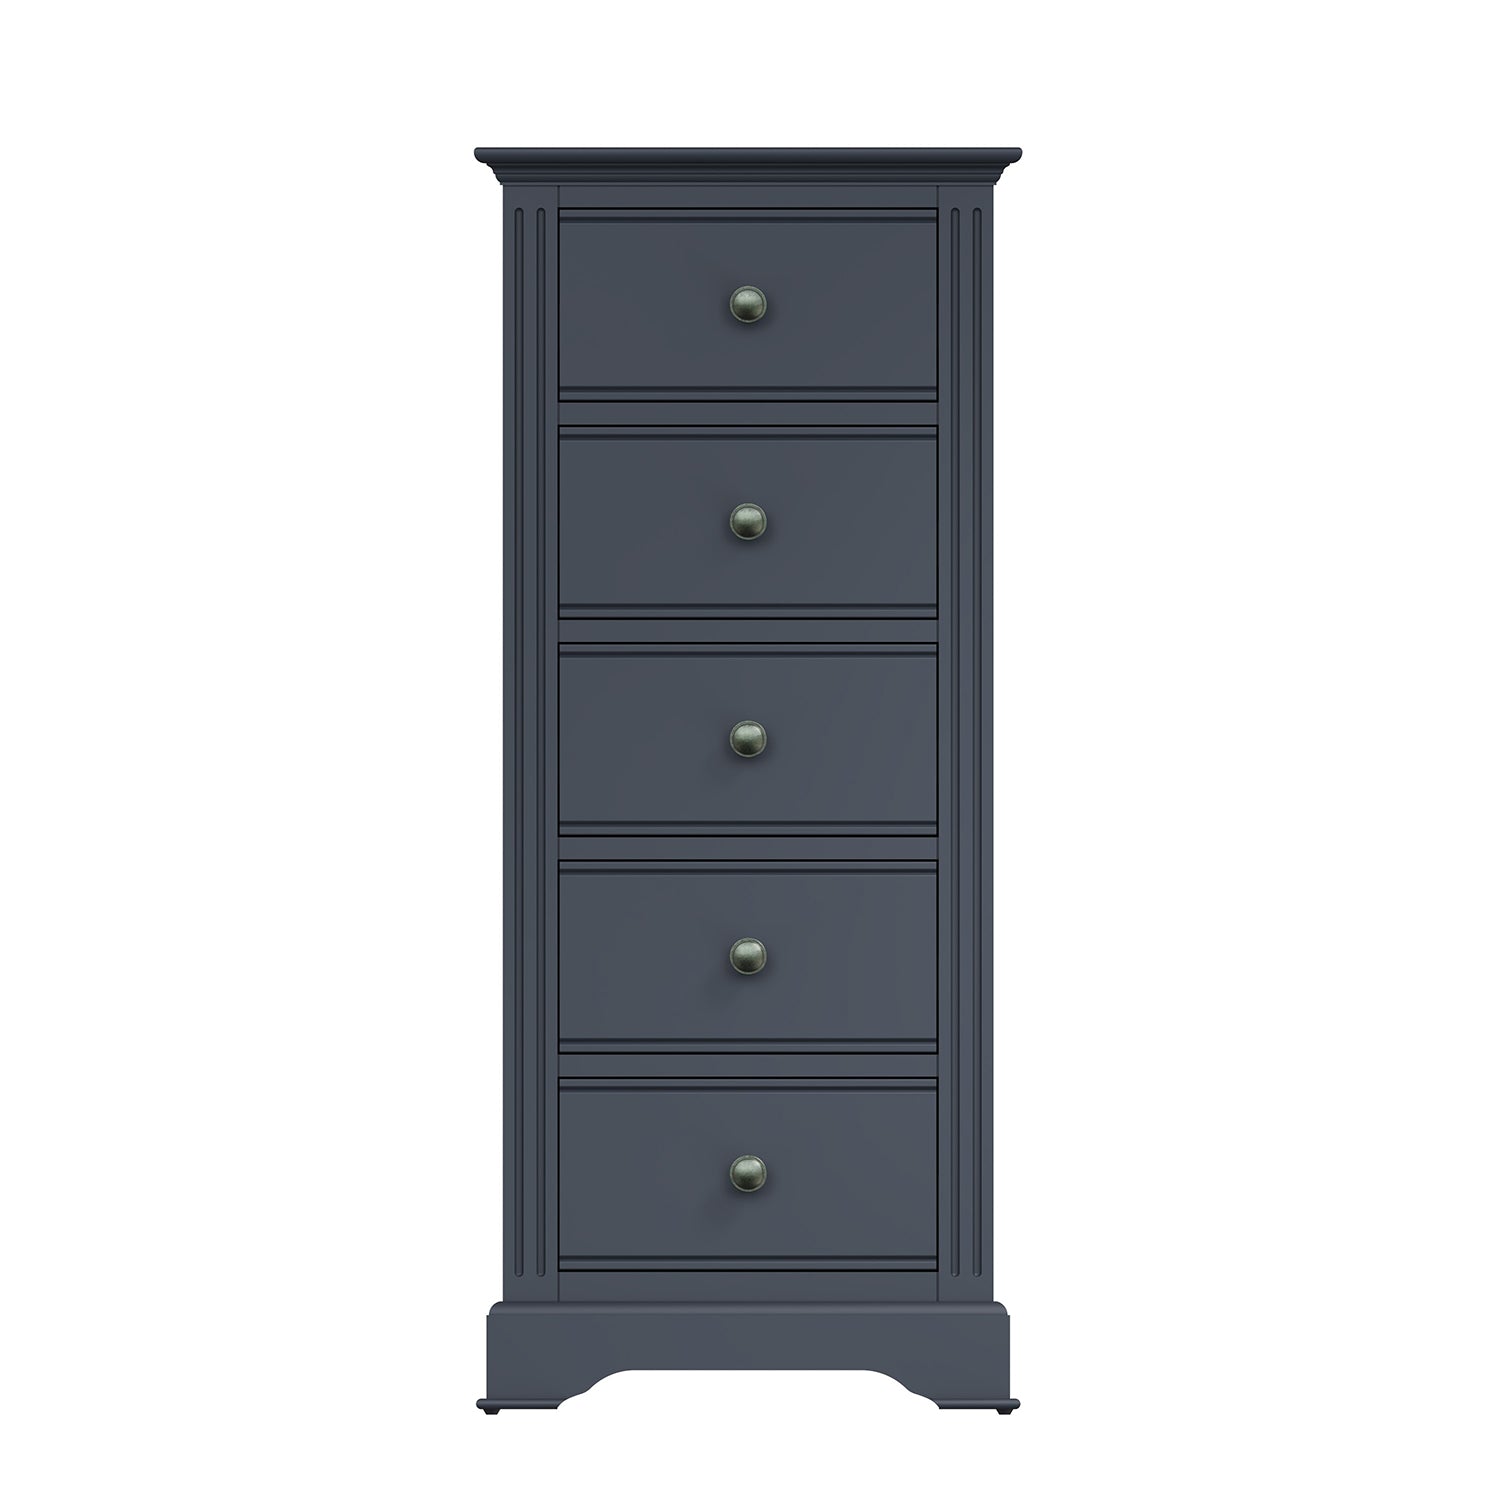 Billingford Charcoal Chest of Drawers - 5 Drawer Narrow